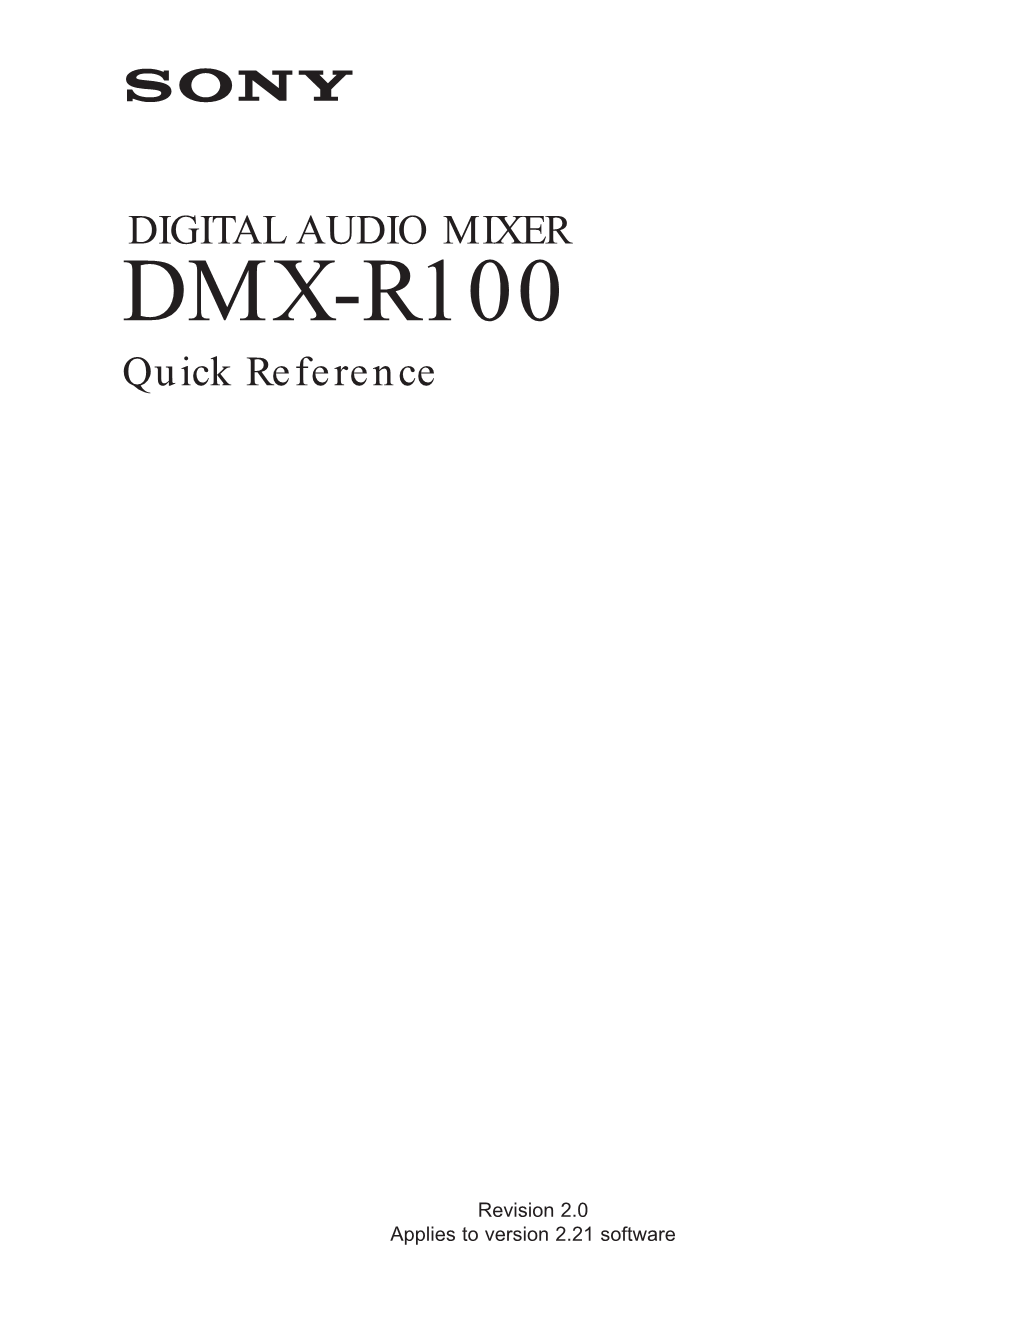 DMX-R100 Quick Reference